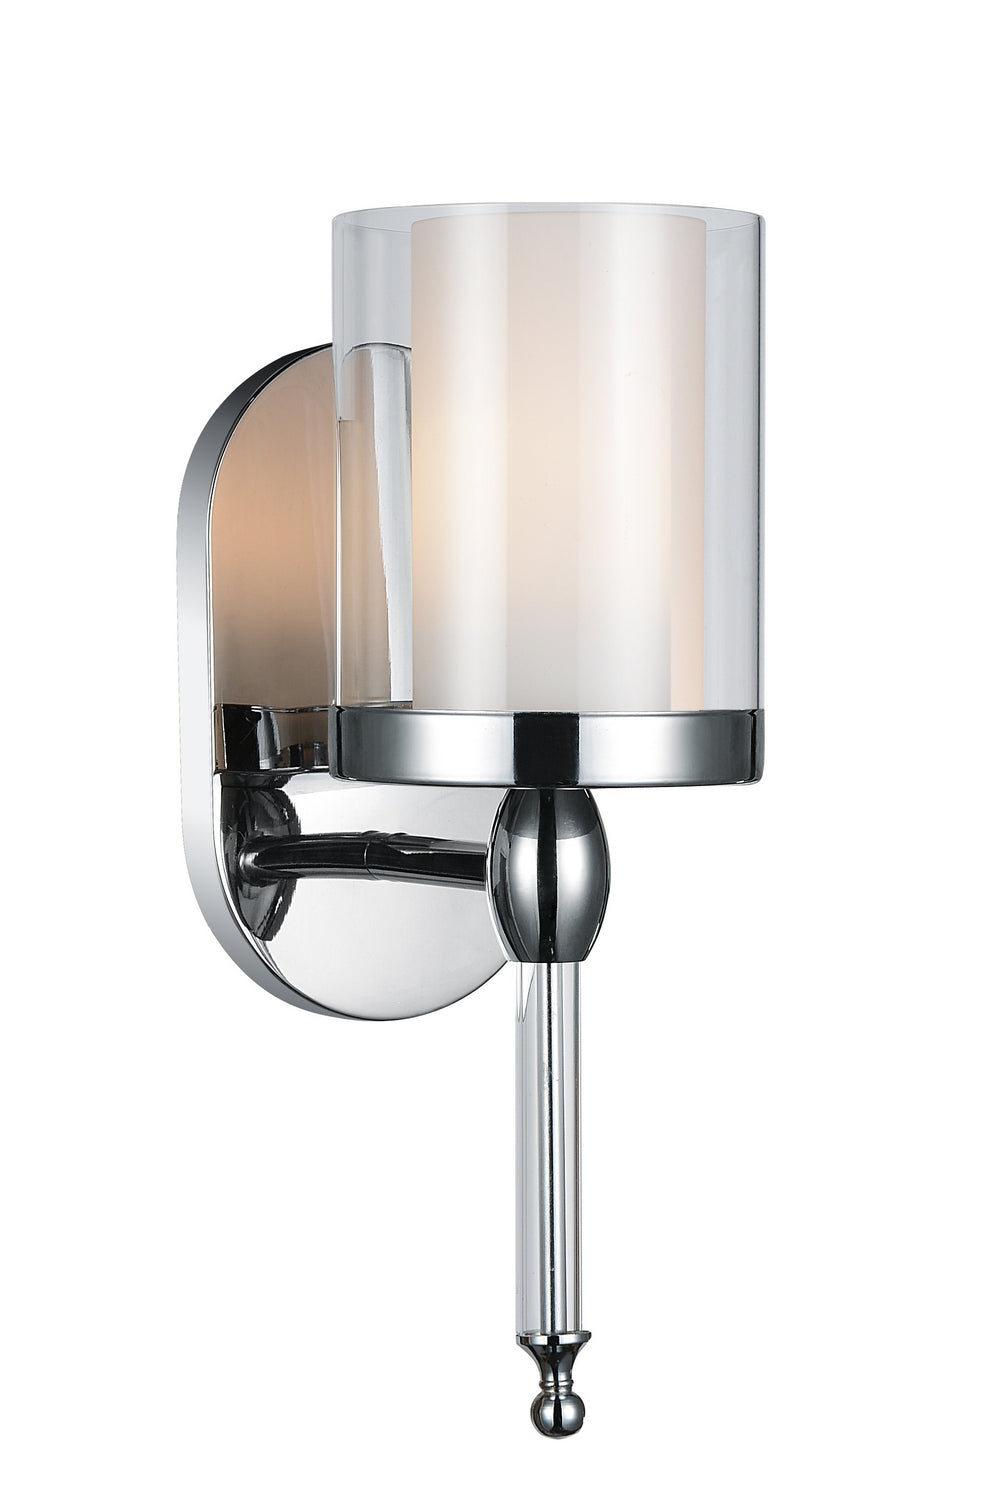 CWI Lighting - 9851W5-1-601 - One Light Bathroom Sconce - Maybelle - Chrome